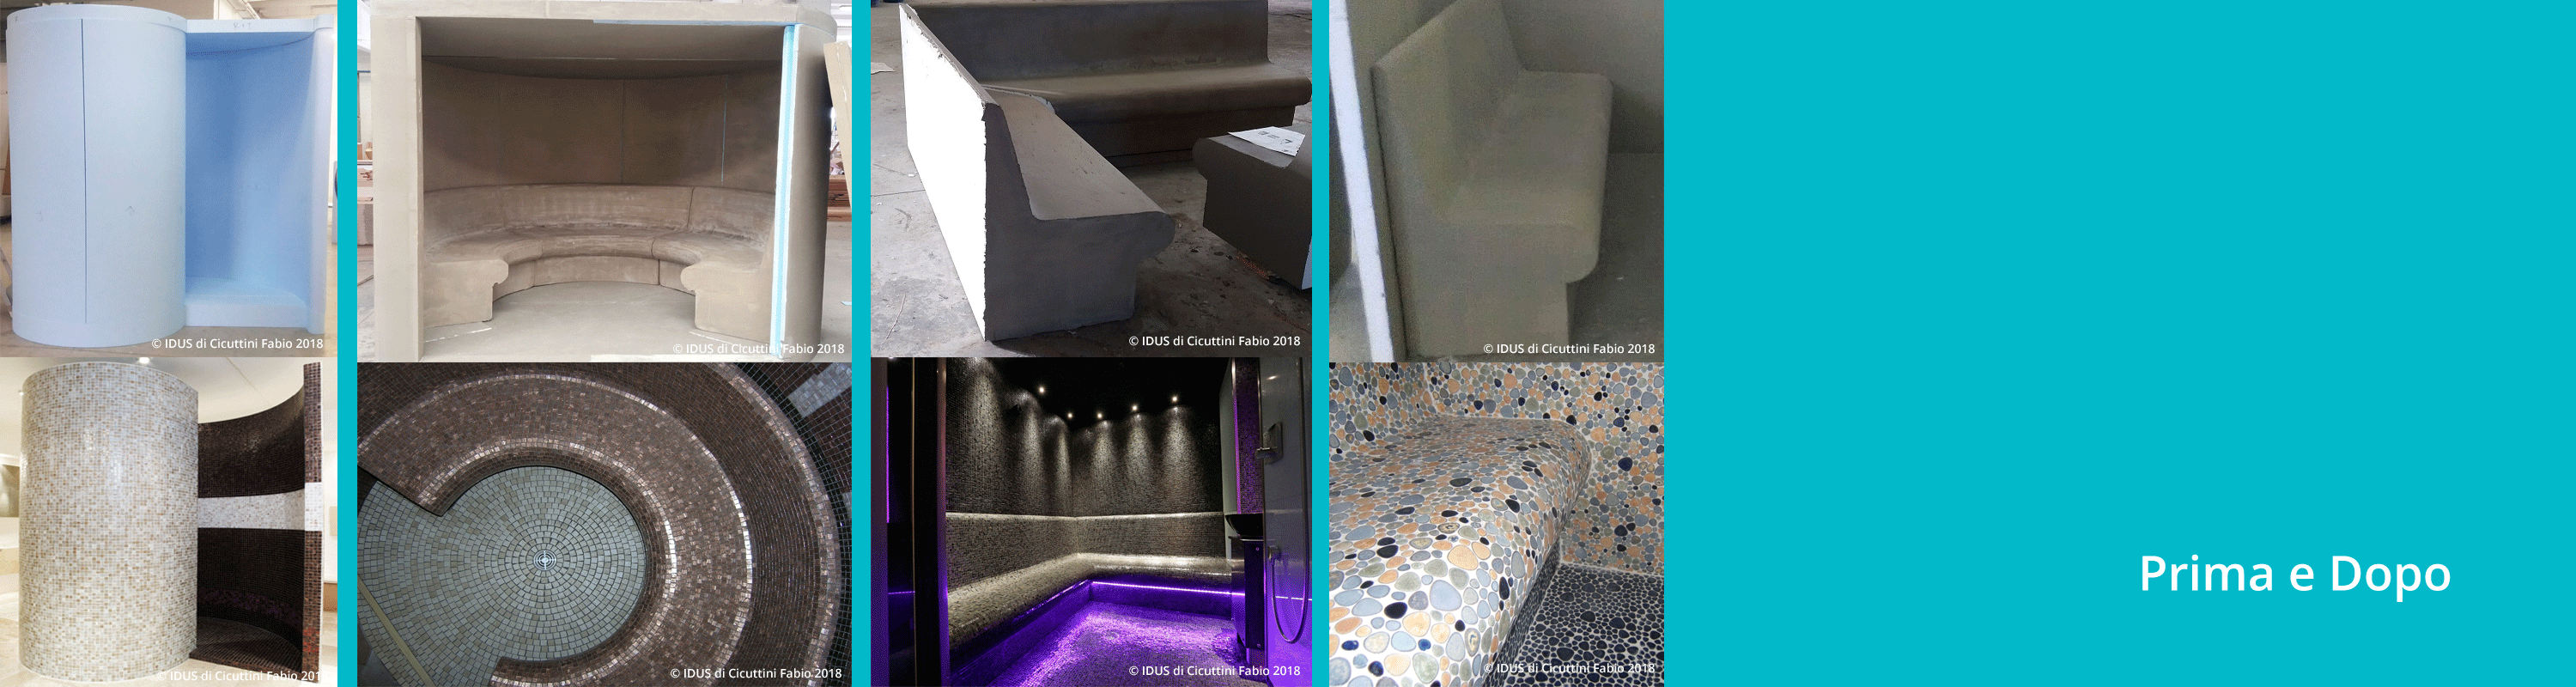 IDUS-bagno-turco-before-and-after